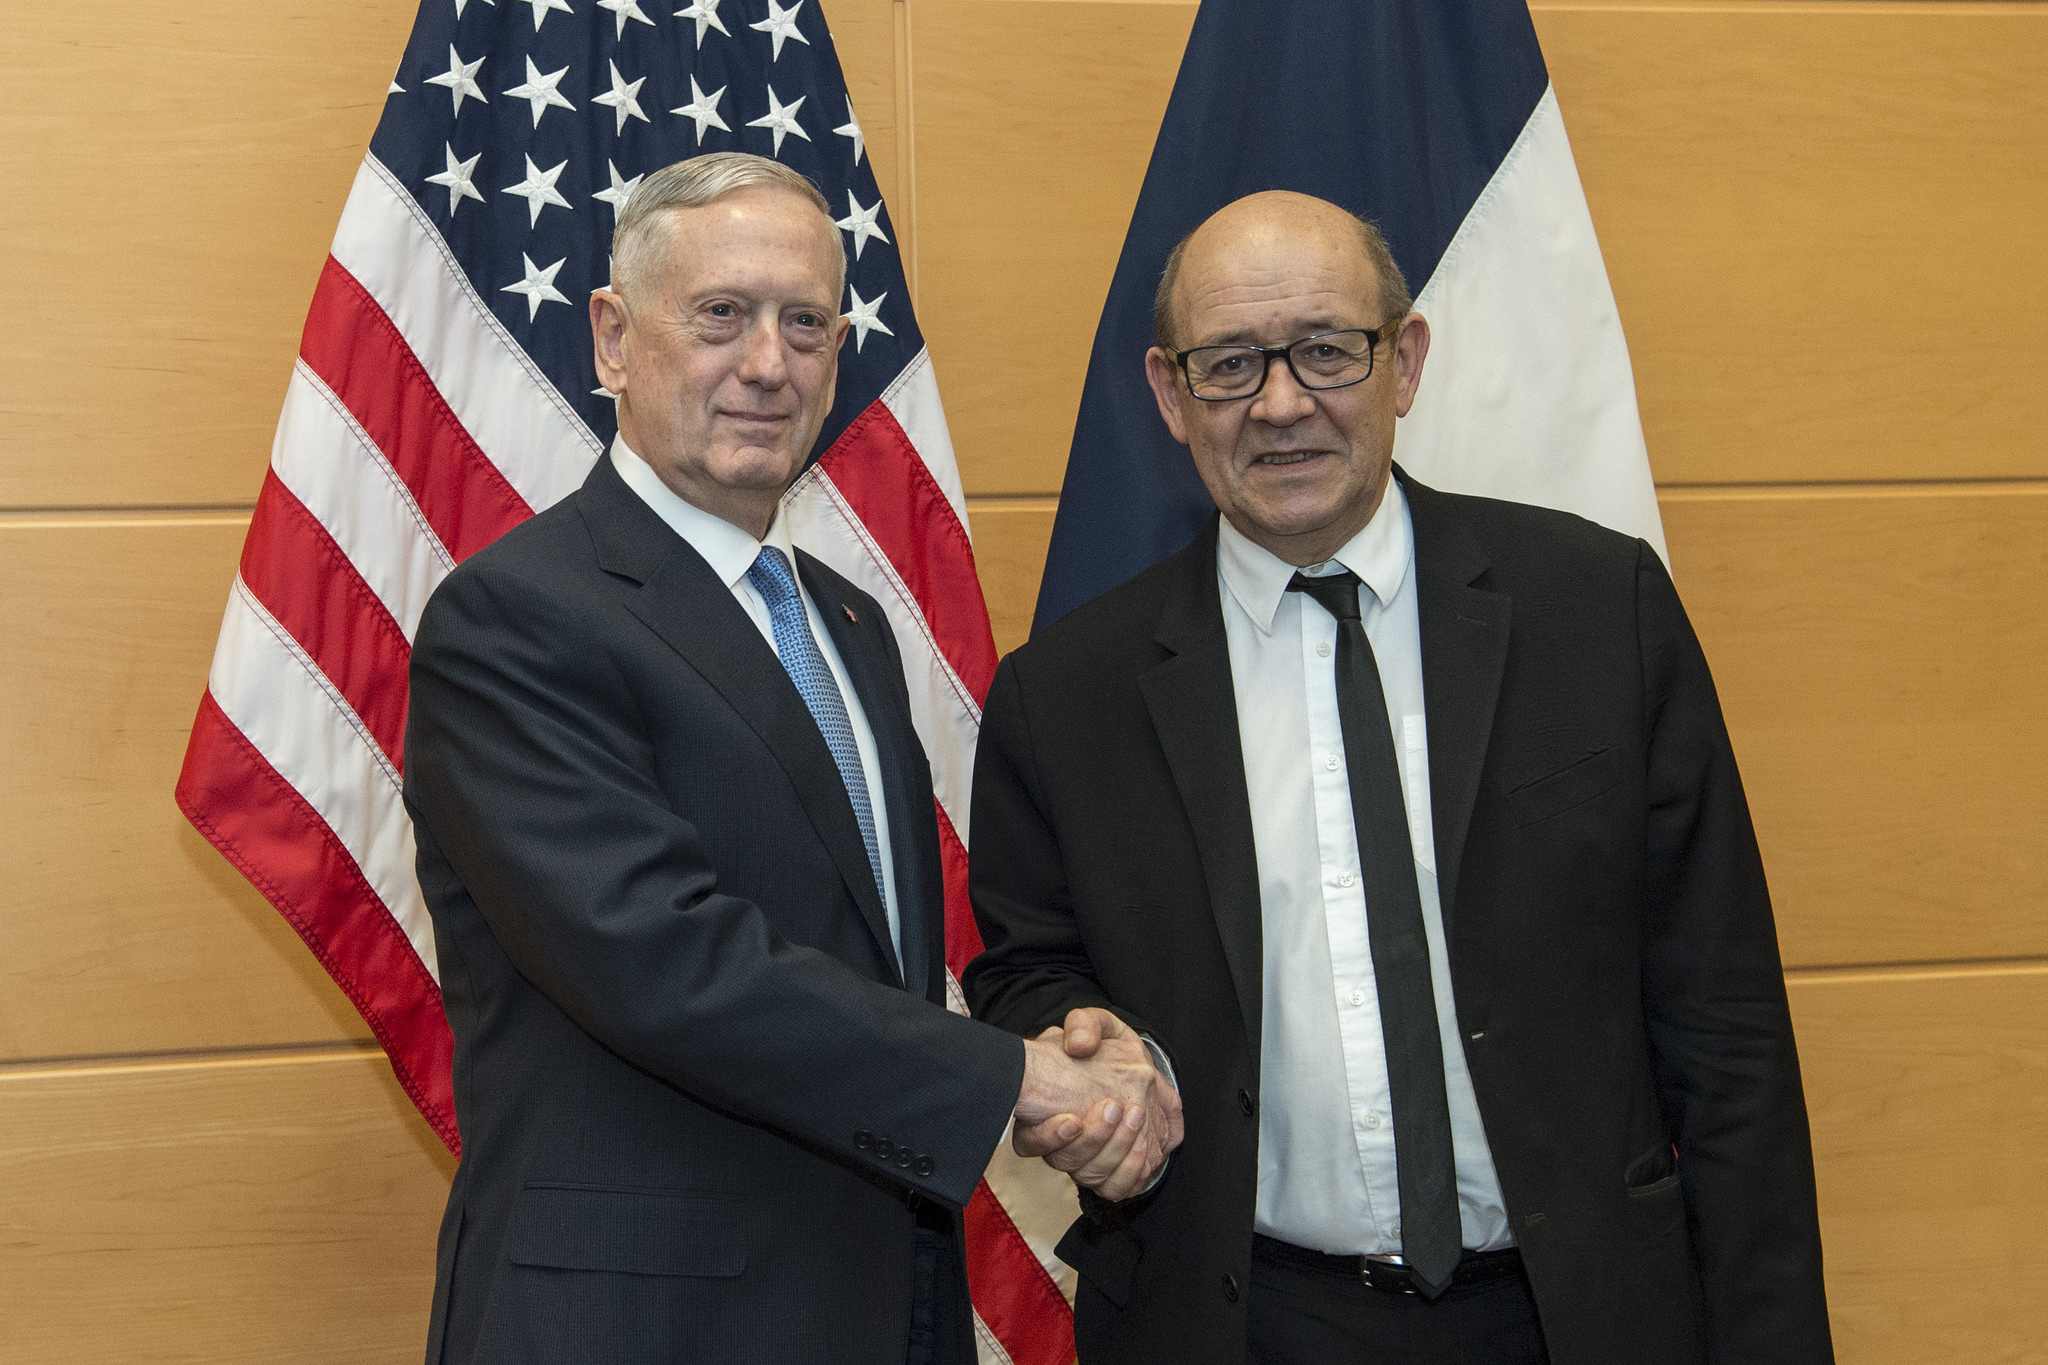 Defense Secretary Jim Mattis, left, meets with French Defense Minister Jean-Yves Le Drian at NATO headquarters in Brussels, Feb. 15, 2017. DoD photo by Air Force Tech. Sgt. Brigitte N. Brantley. -